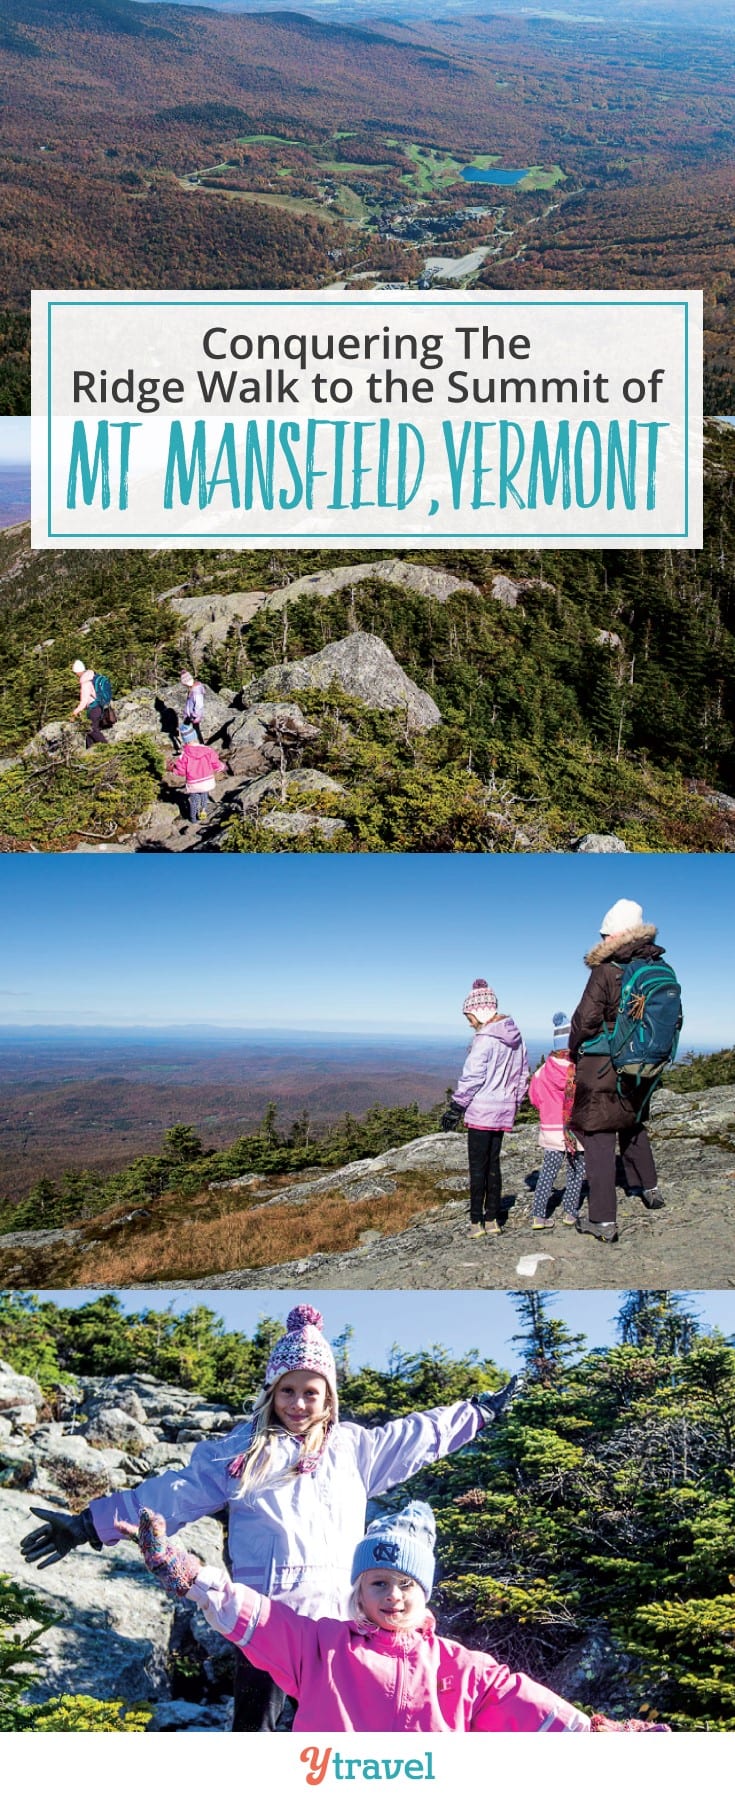 Not sure if there is a family friendly hike in Mount Mansfield in Vermont? Your kids will love this ridge walk to the summit of Mt Mansfield in Stowe. Epic 360 views #Familytravel #Vermont #NewEngland #hikes #MountMansfield #Stowe